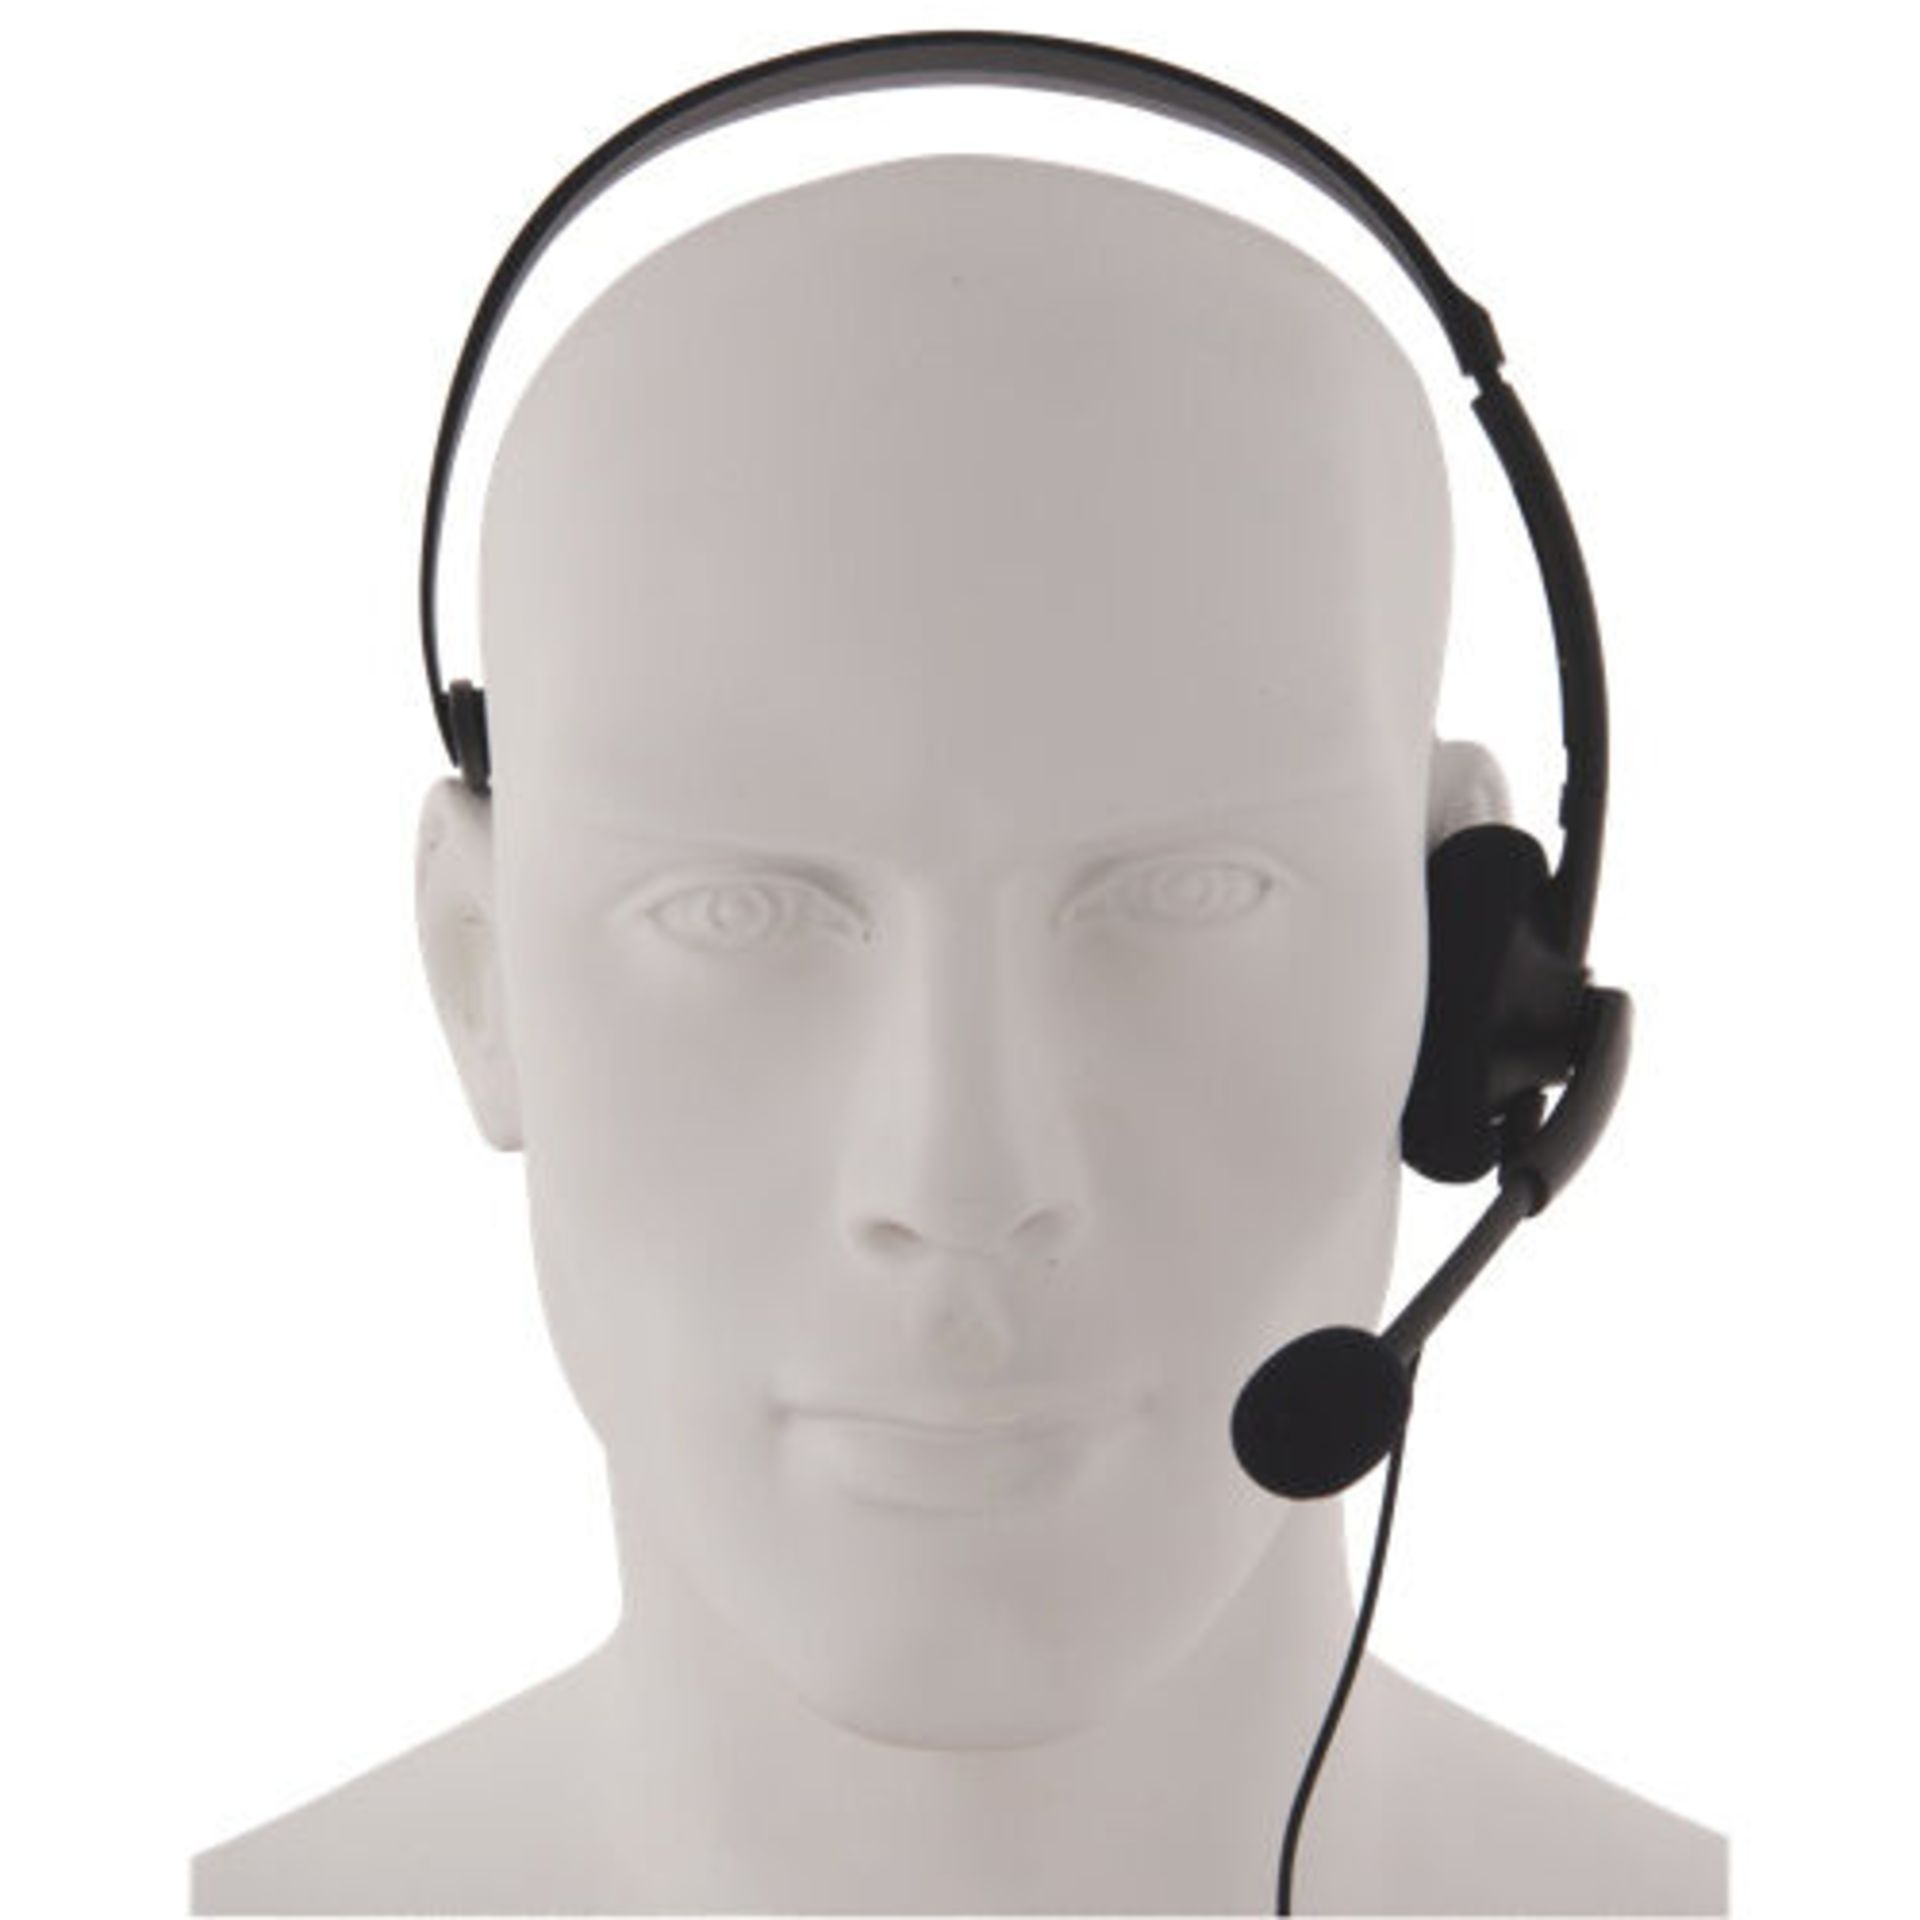 JOBLOT 50 X NEW OFFICIAL XBOX 360 LIVE ONLINE CHAT HEADSET WITH MIC GAMING HEADPHONES 2.5MM AUX